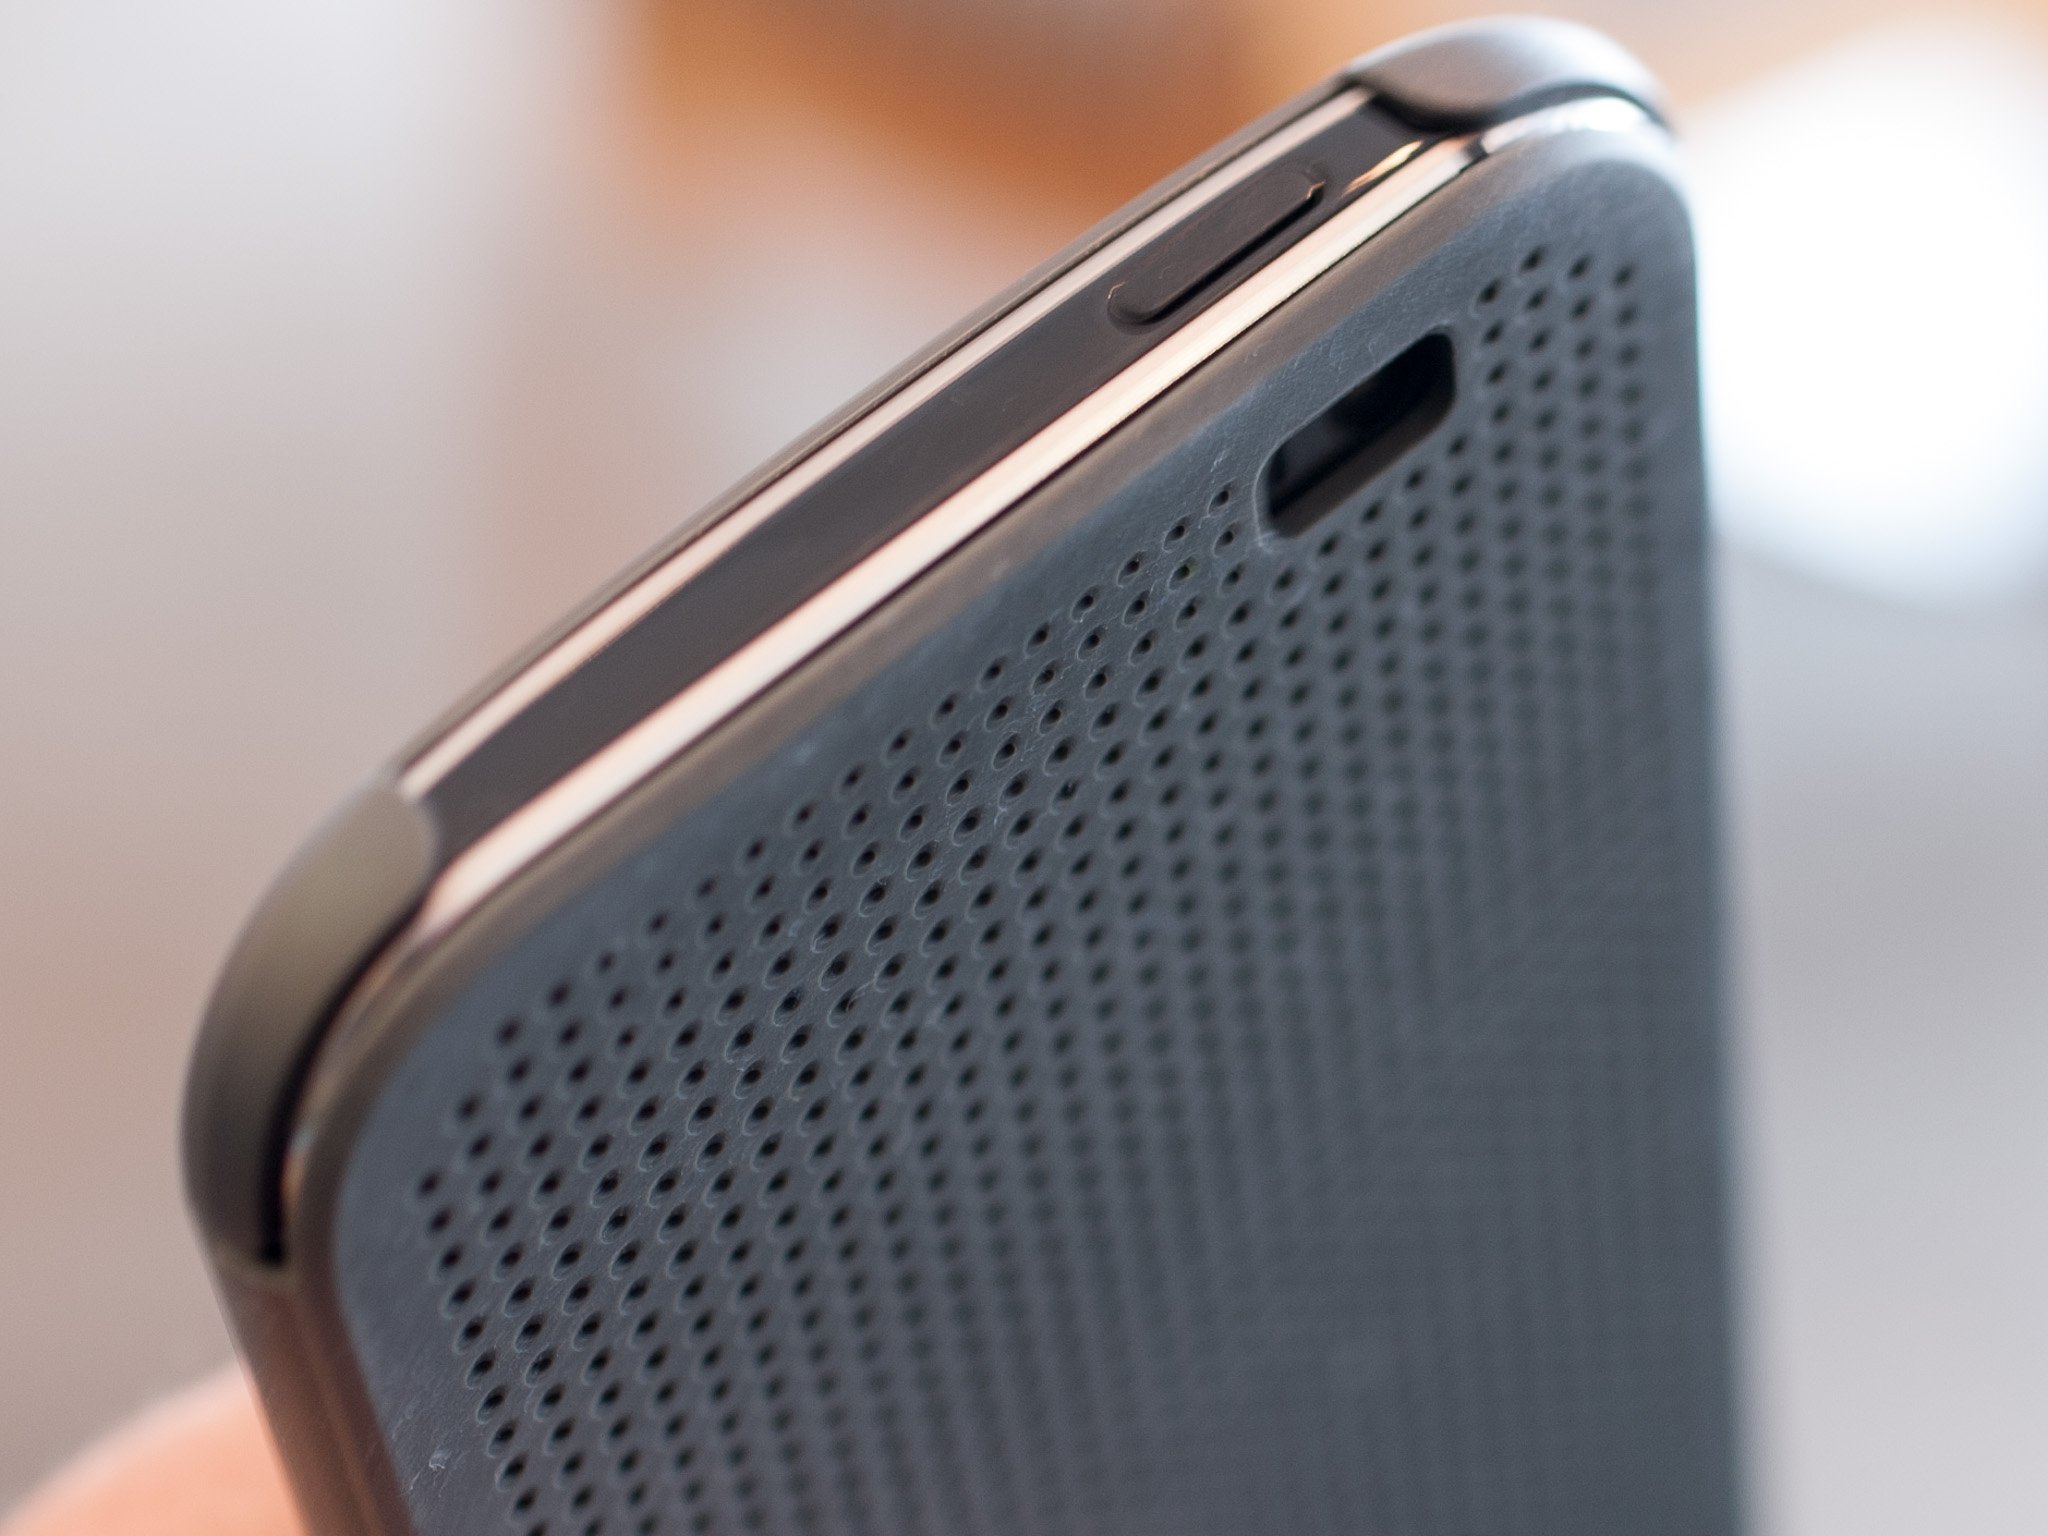 HTC One M8 Dots View Case